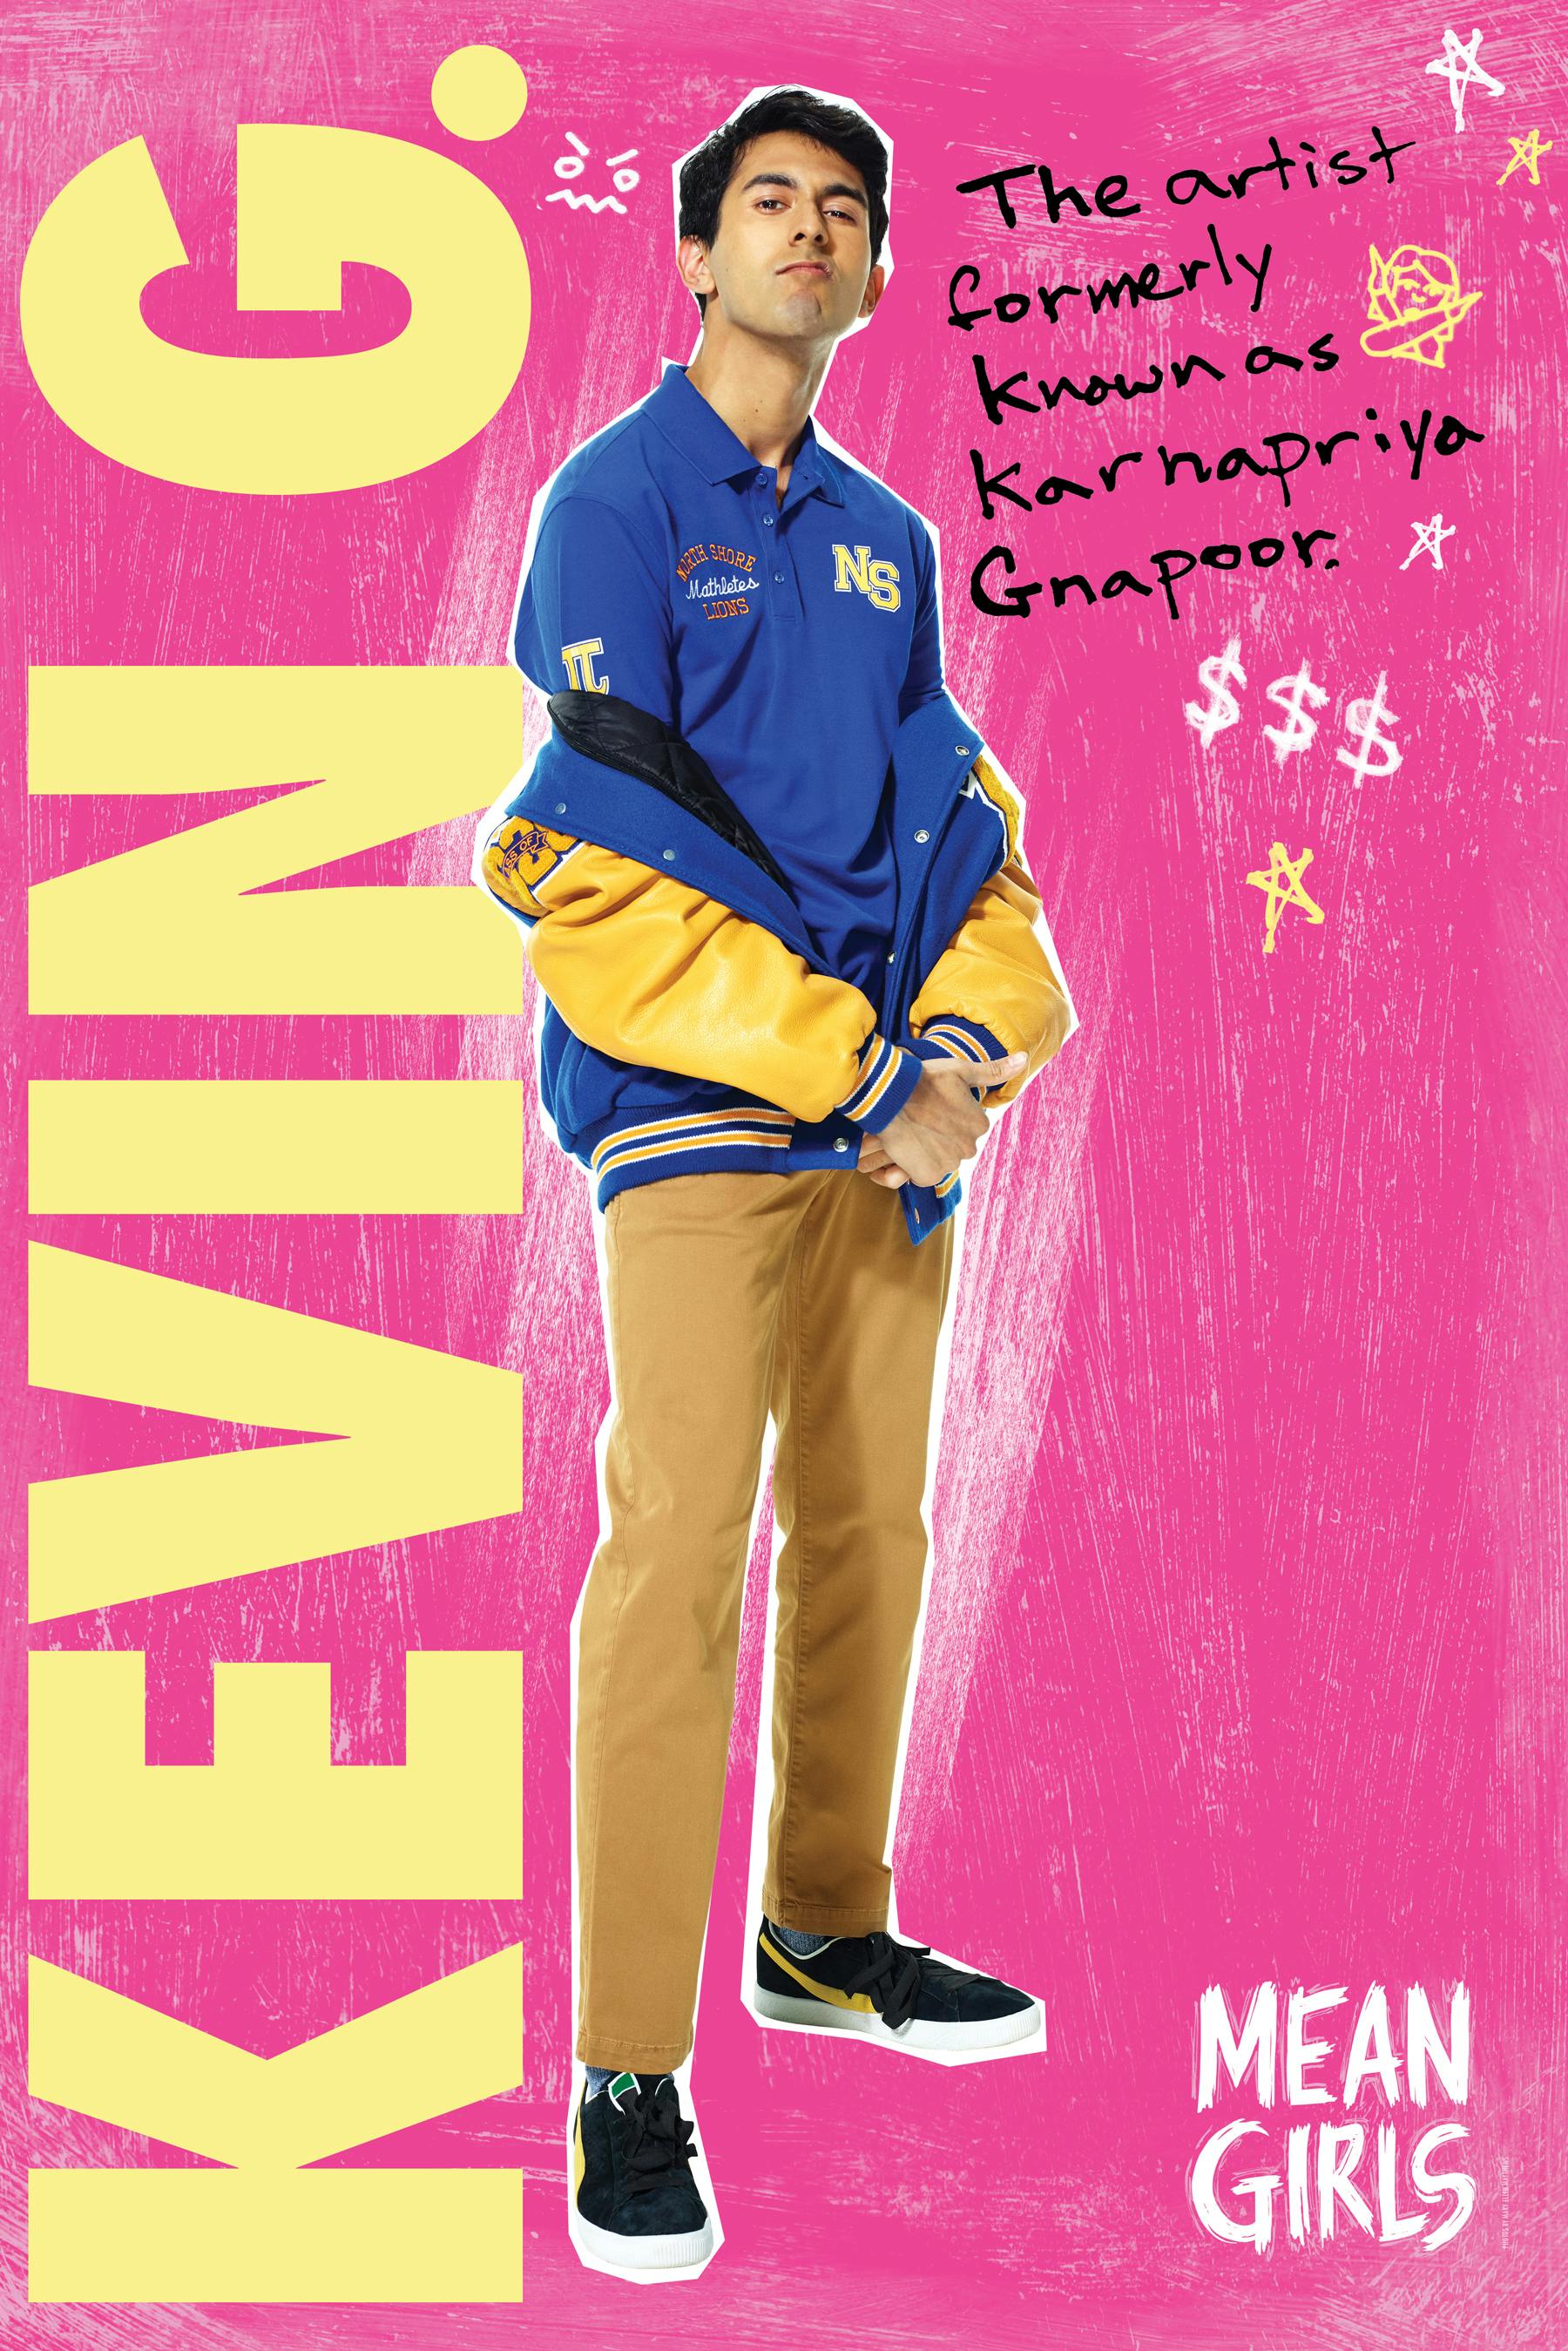 Mean Girls Broadway Musical Spotco- Cheech Manohar (Kevin Gnapoor)